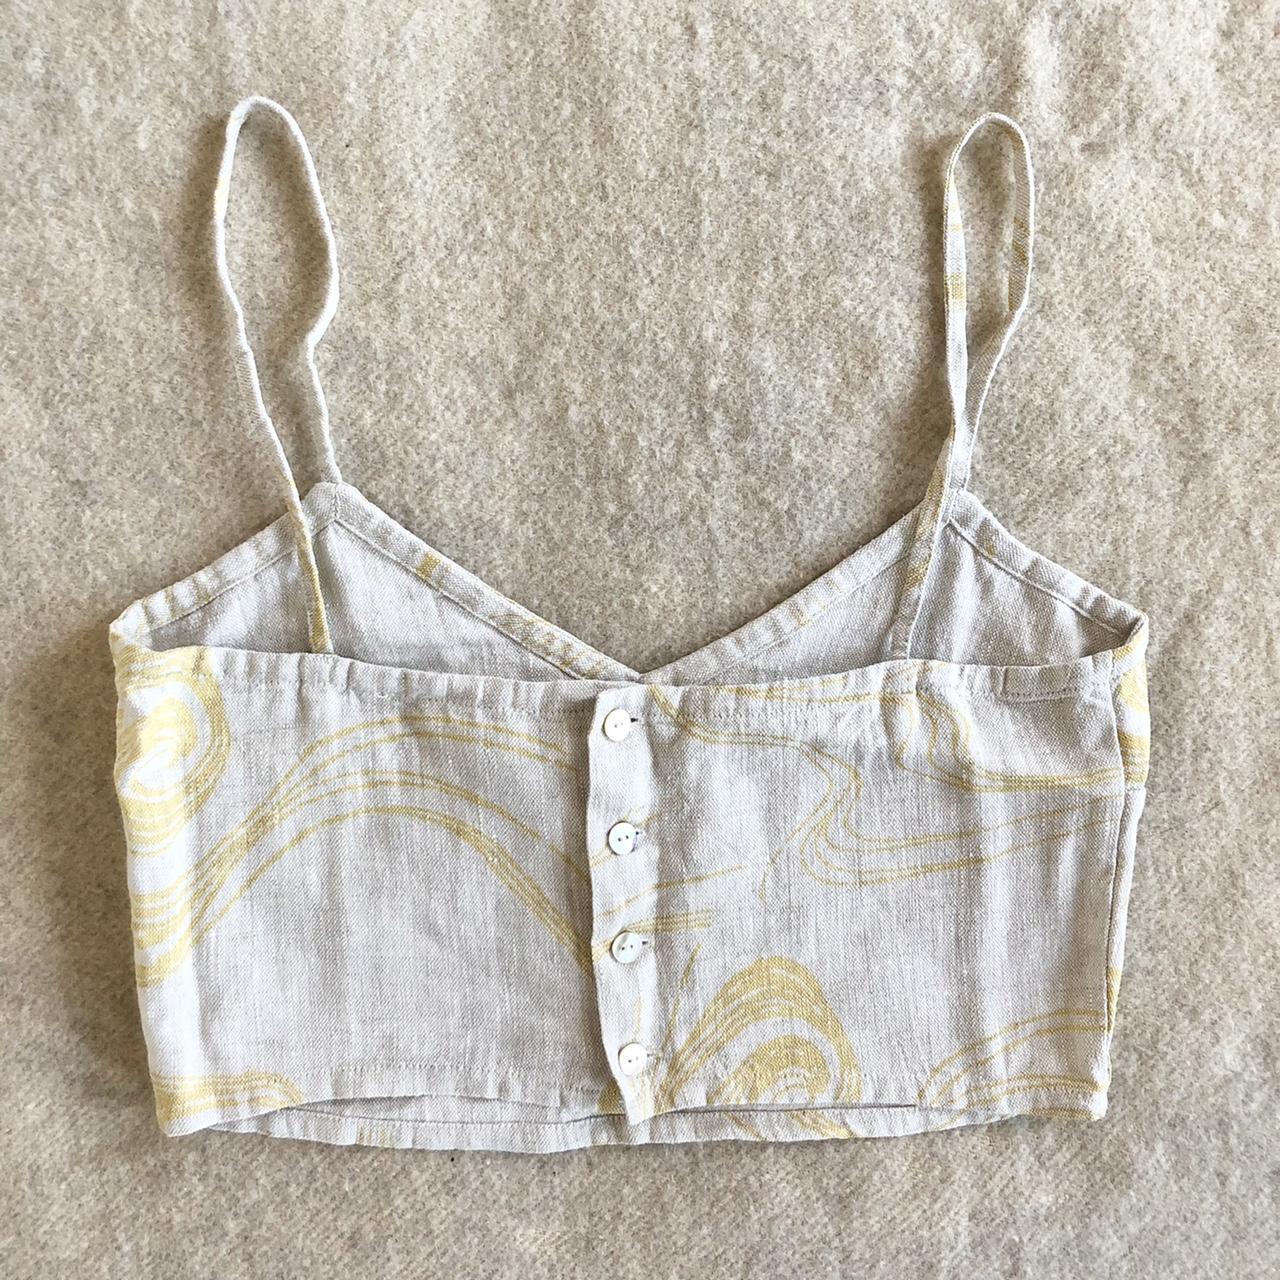 Paloma Wool Women's Cream and Yellow Vests-tanks-camis (3)